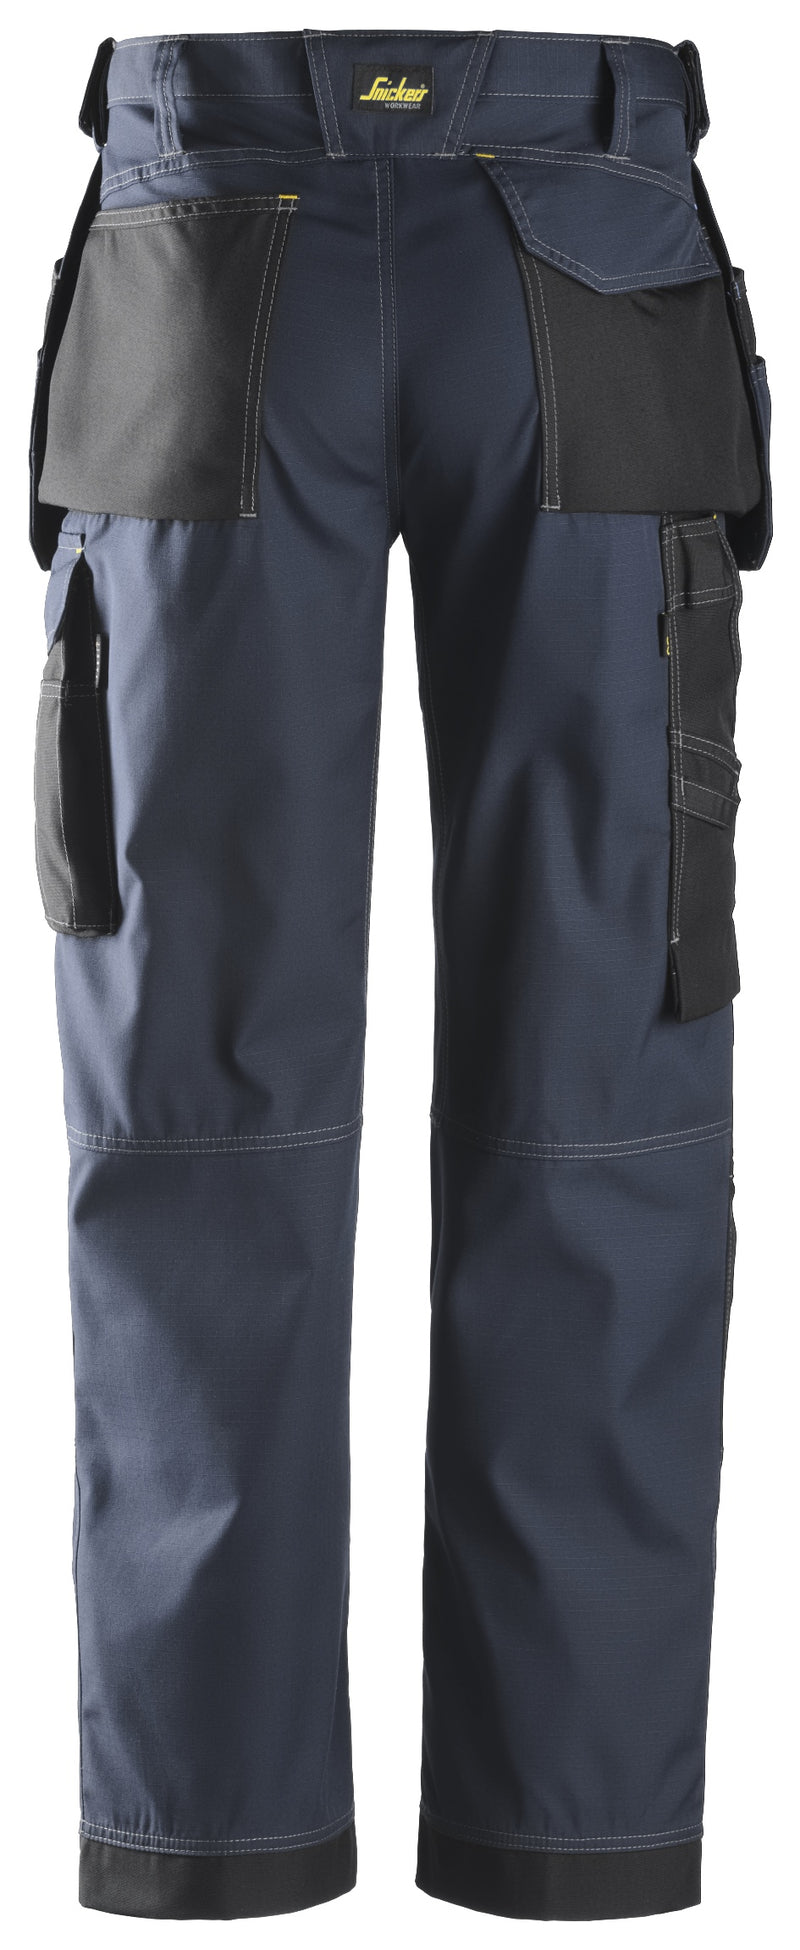 Snickers Craftsman Holster Pockets Trousers Rip-Stop, Navy/Black, Size 152